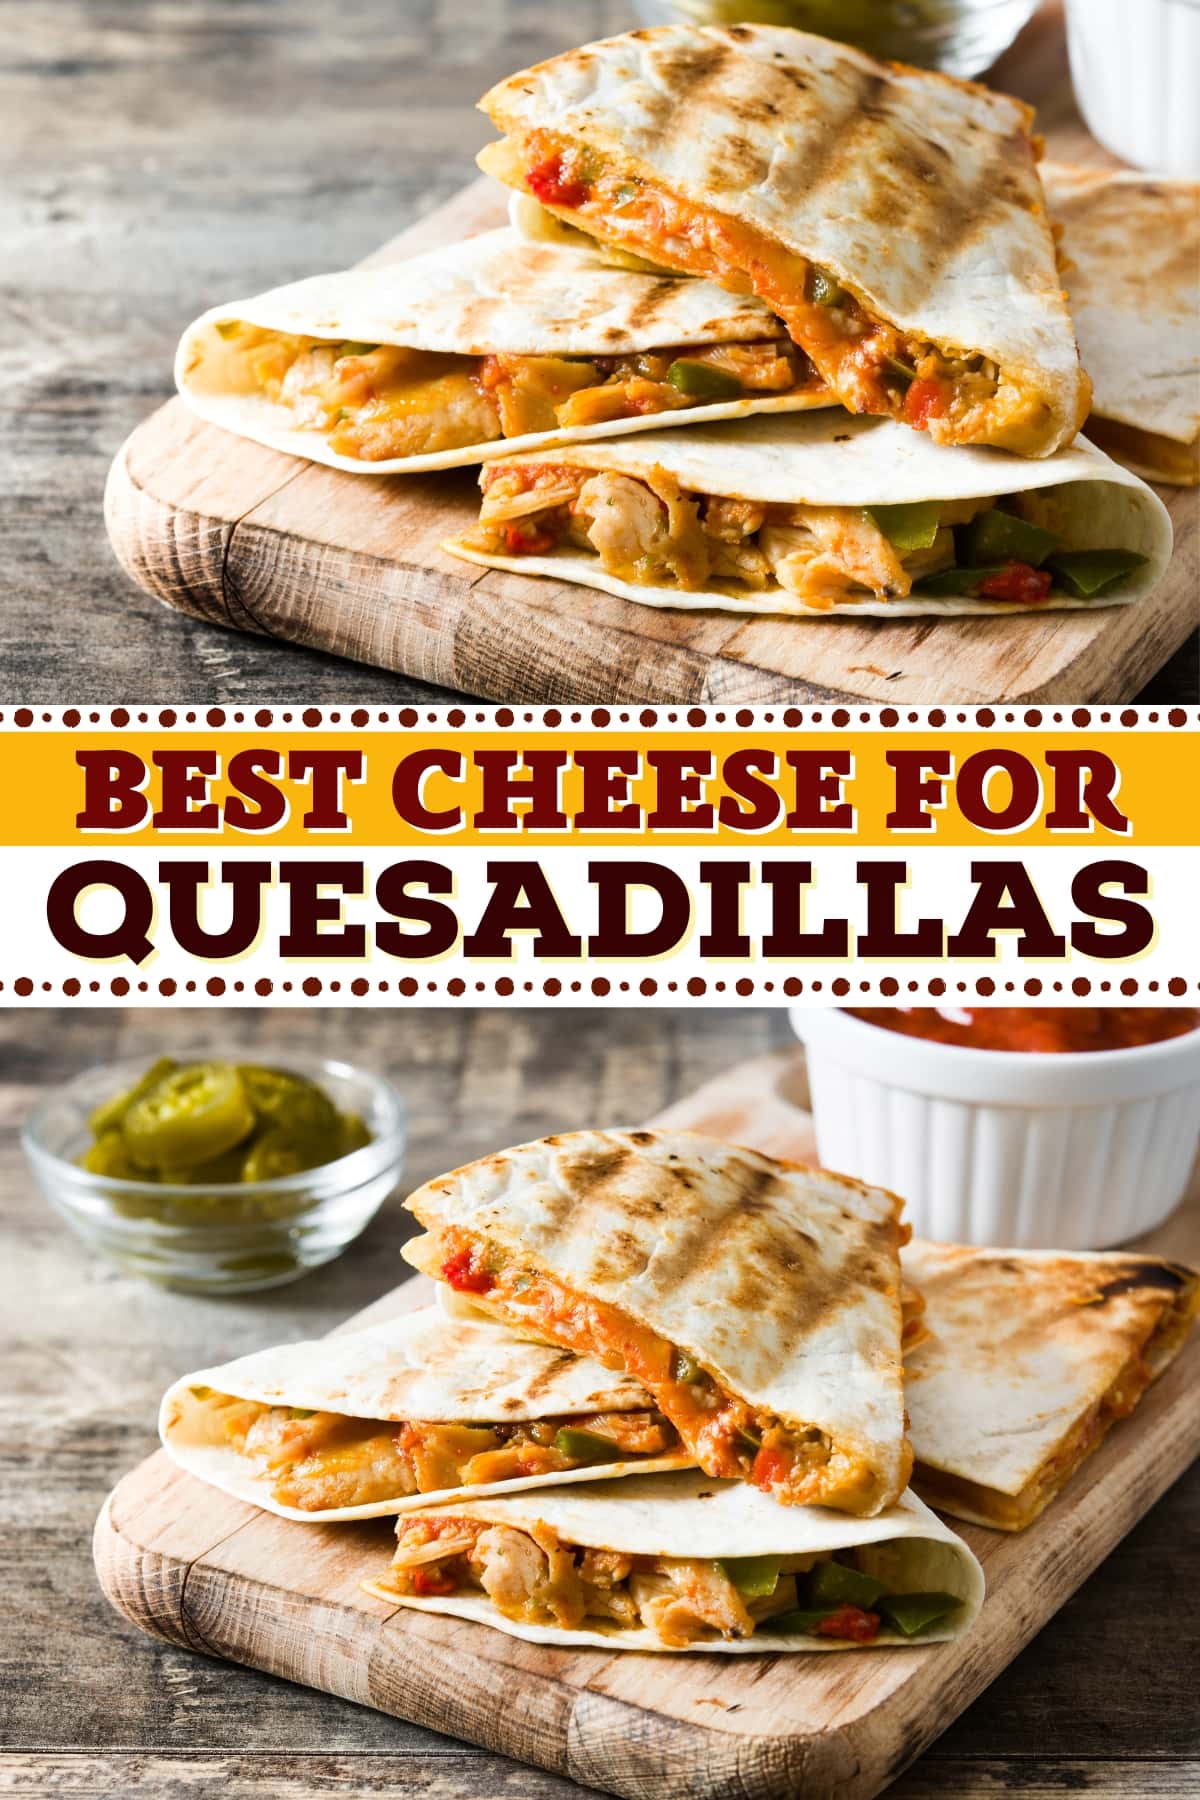 Best Cheese for Quesadillas (10 Top Choices) - Insanely Good